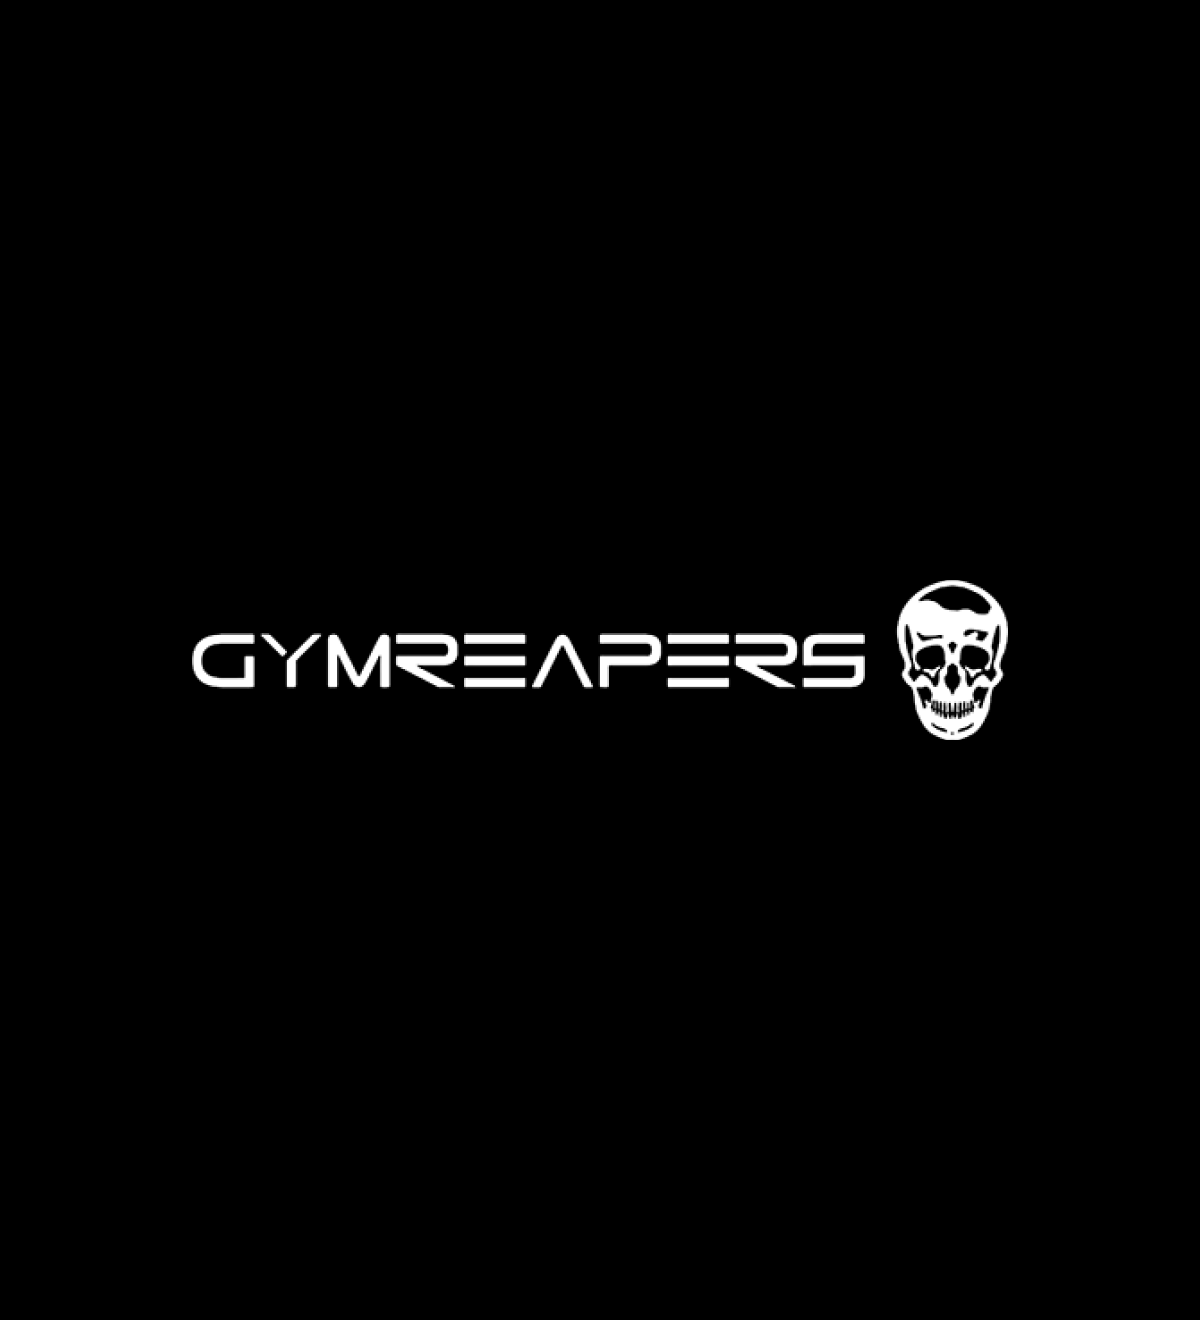 Gym Reapers review for SANOMADS